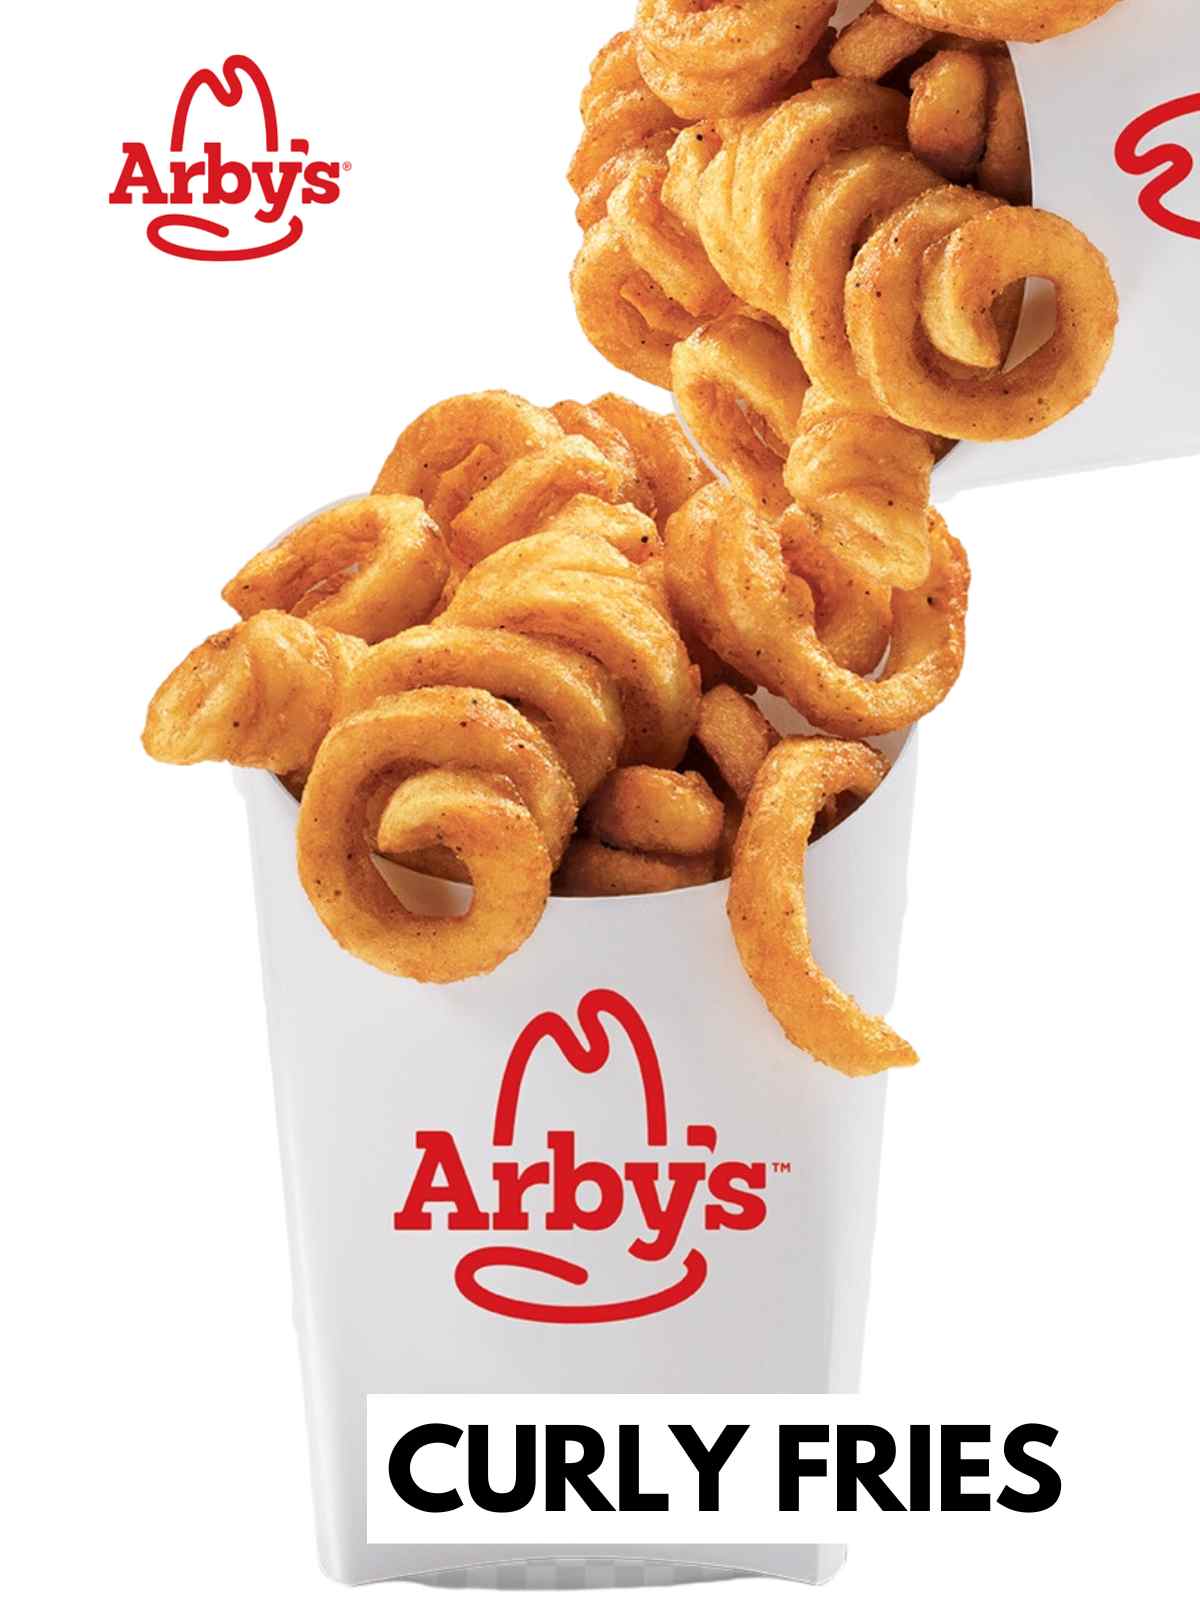 Curly fries in a white bag with Arby's logo.